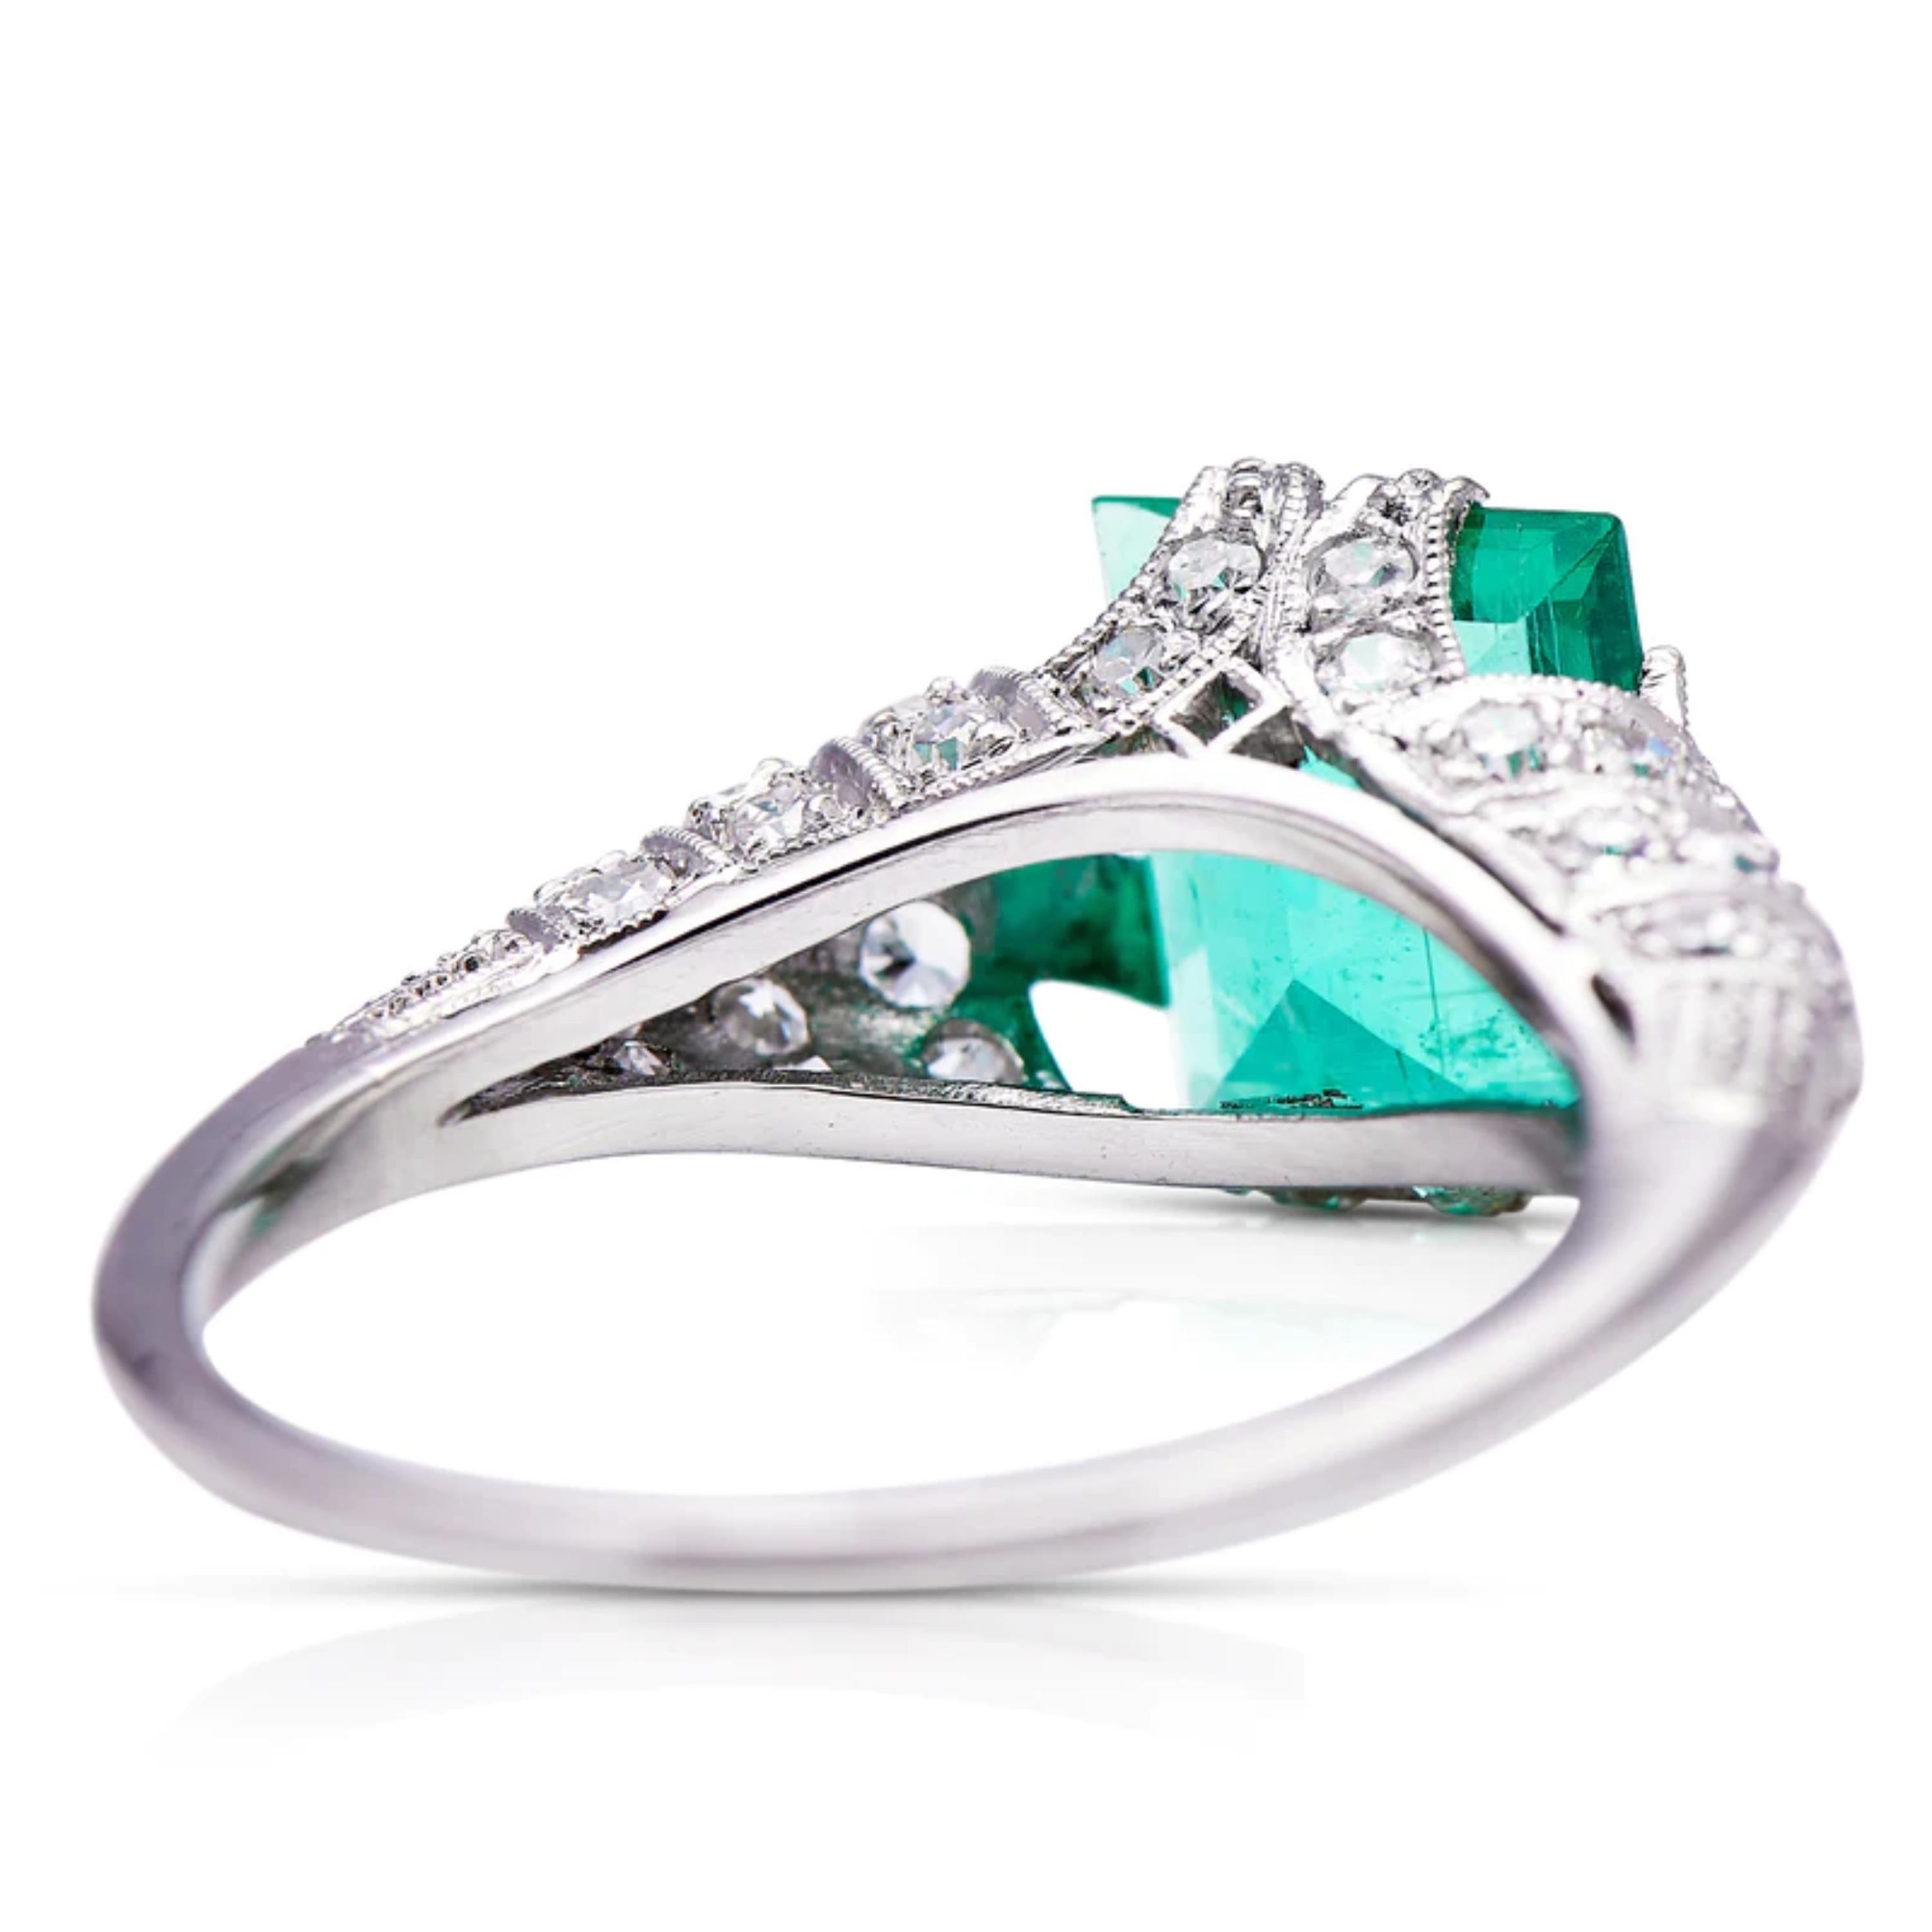 Women's Art Deco Style 1.85 Ct Square Cut Emerald Diamond Engagement Ring Cocktail Ring For Sale